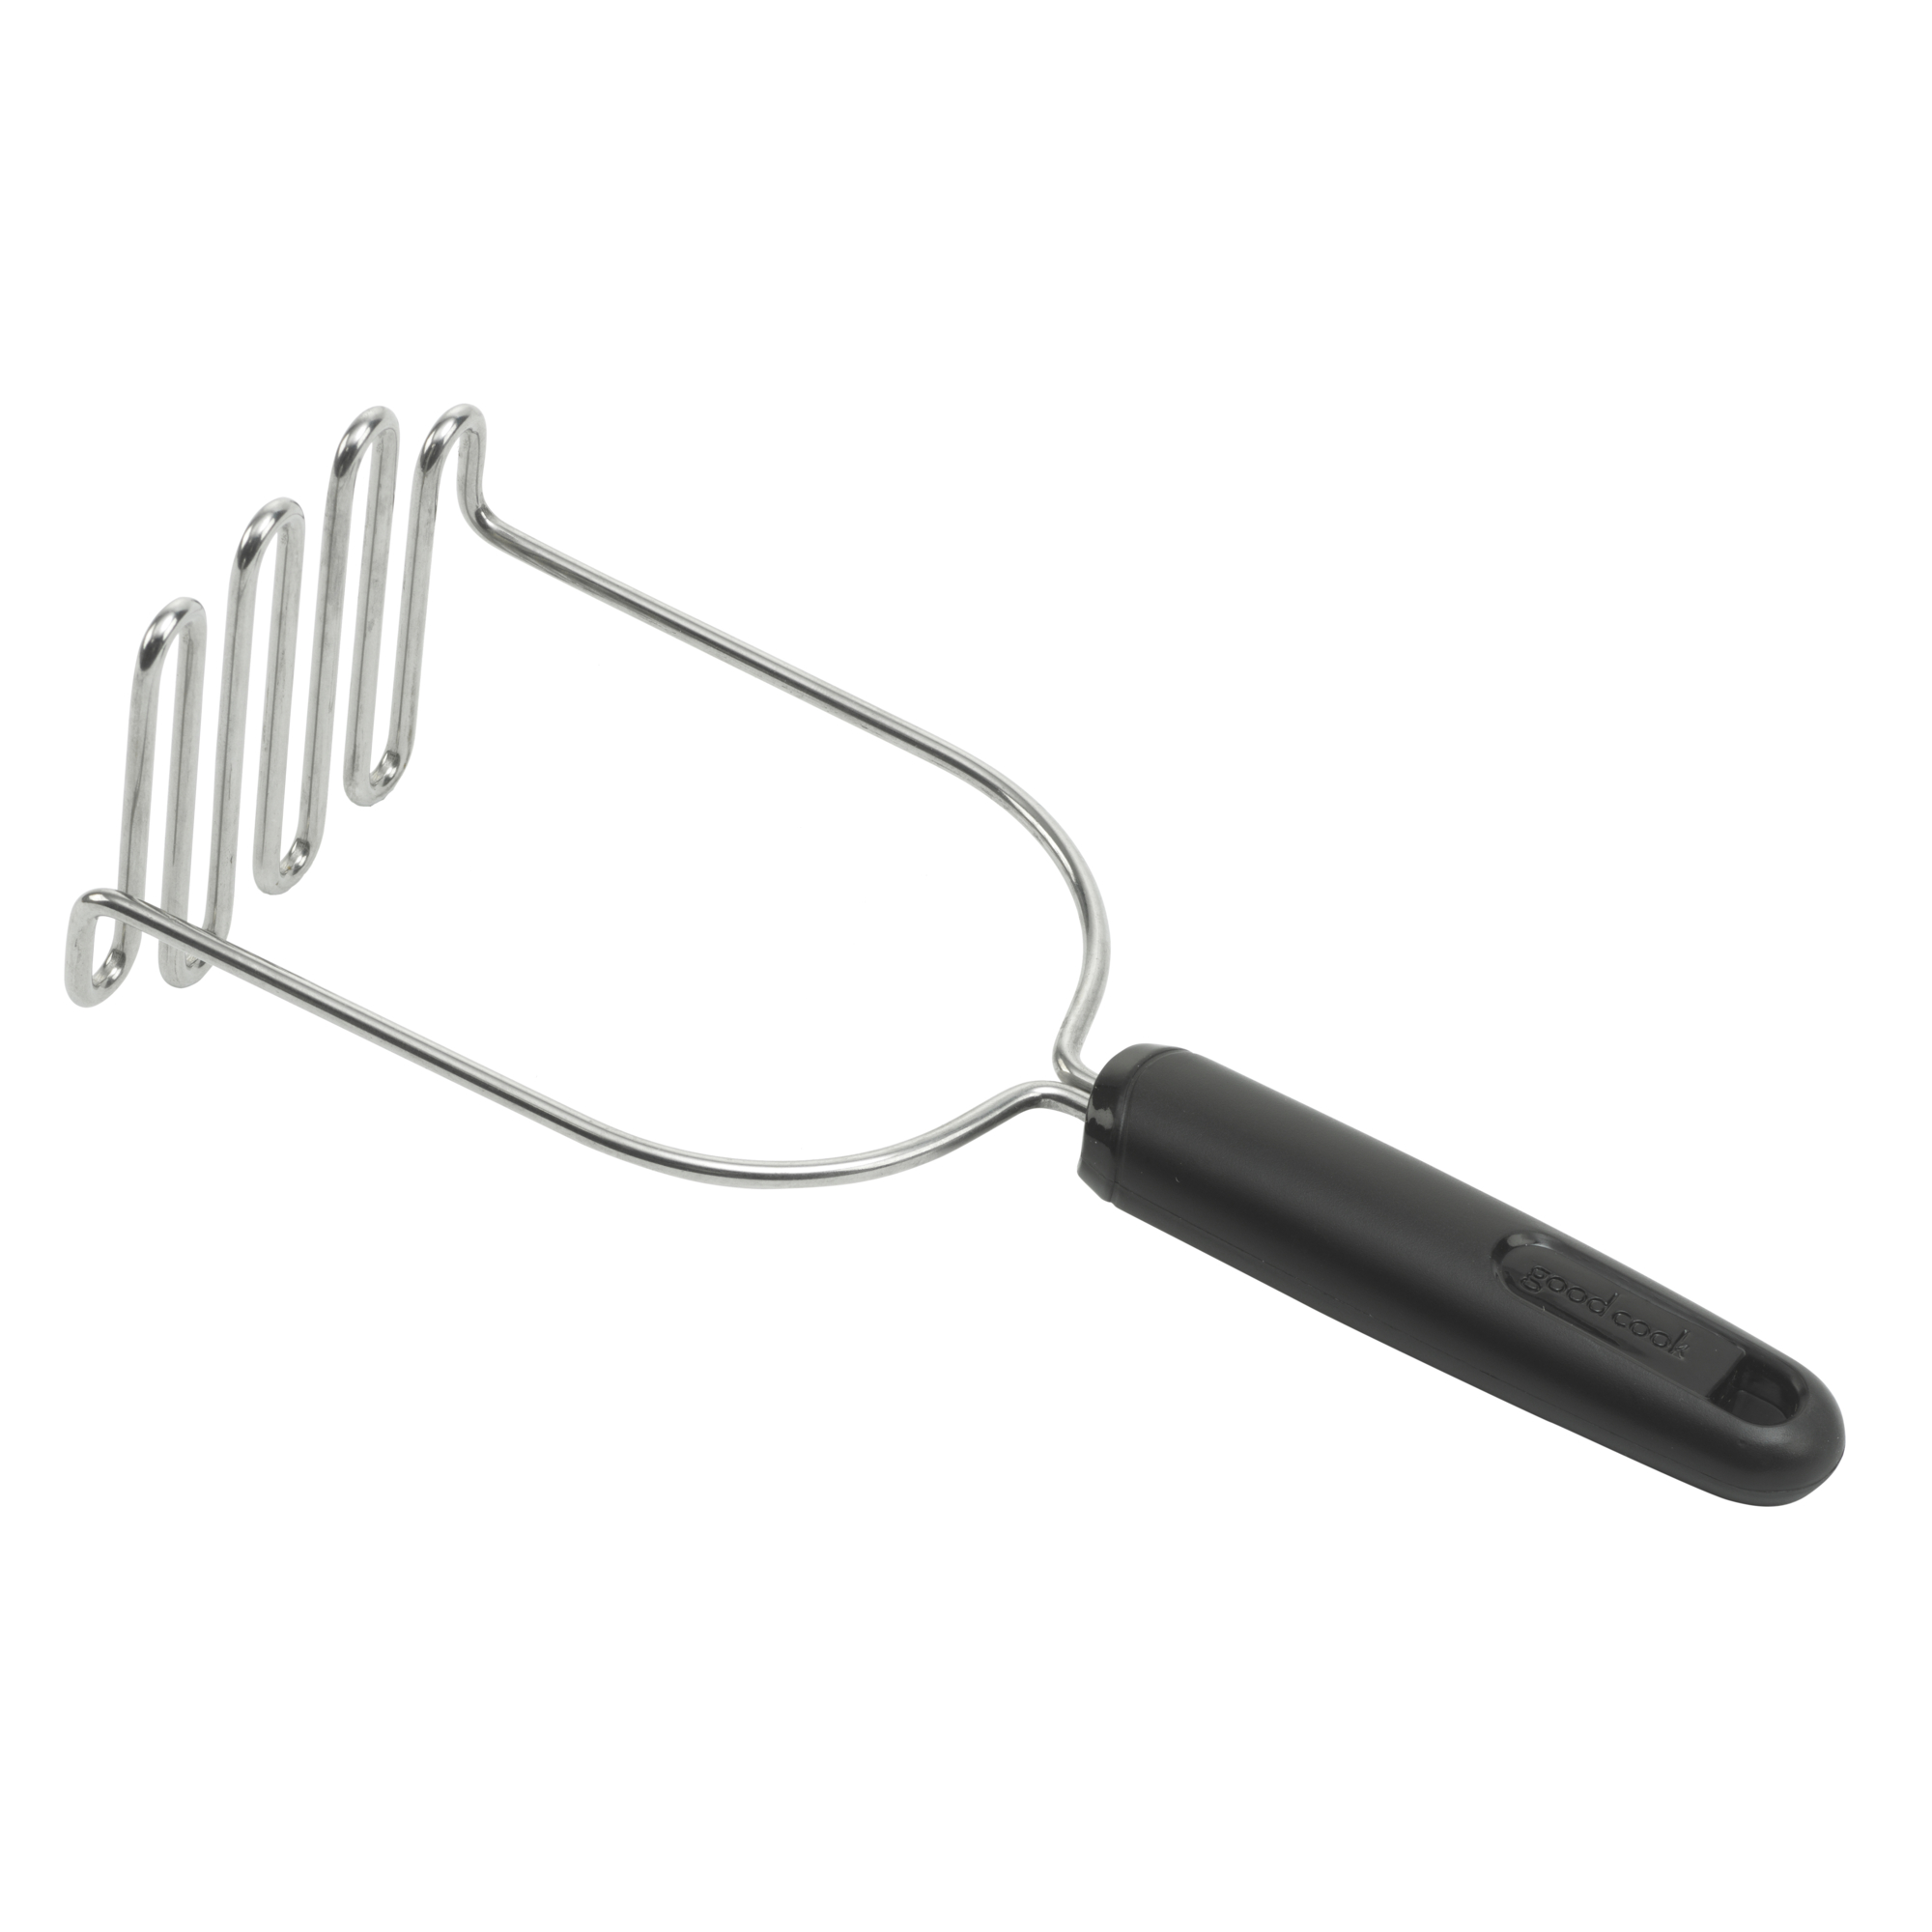 GoodCook 9.5" Stainless Steel Potato Masher and Meat Chopper Tool, Silver/Black - image 1 of 5